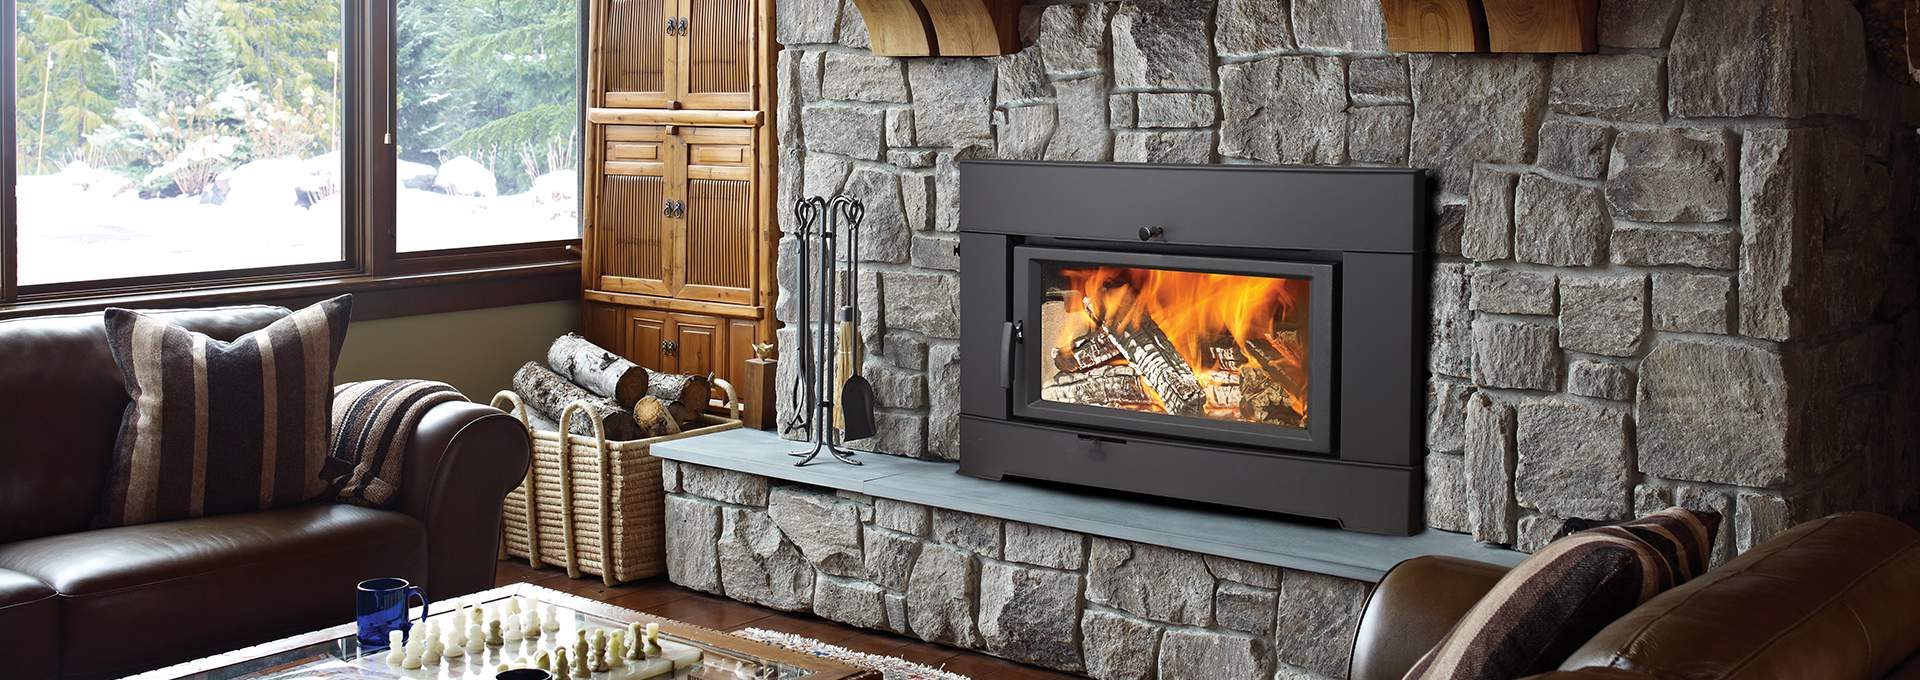 Some Like It Hot Durham Ontario Fireplaces Stoves Patio with dimensions 1920 X 680